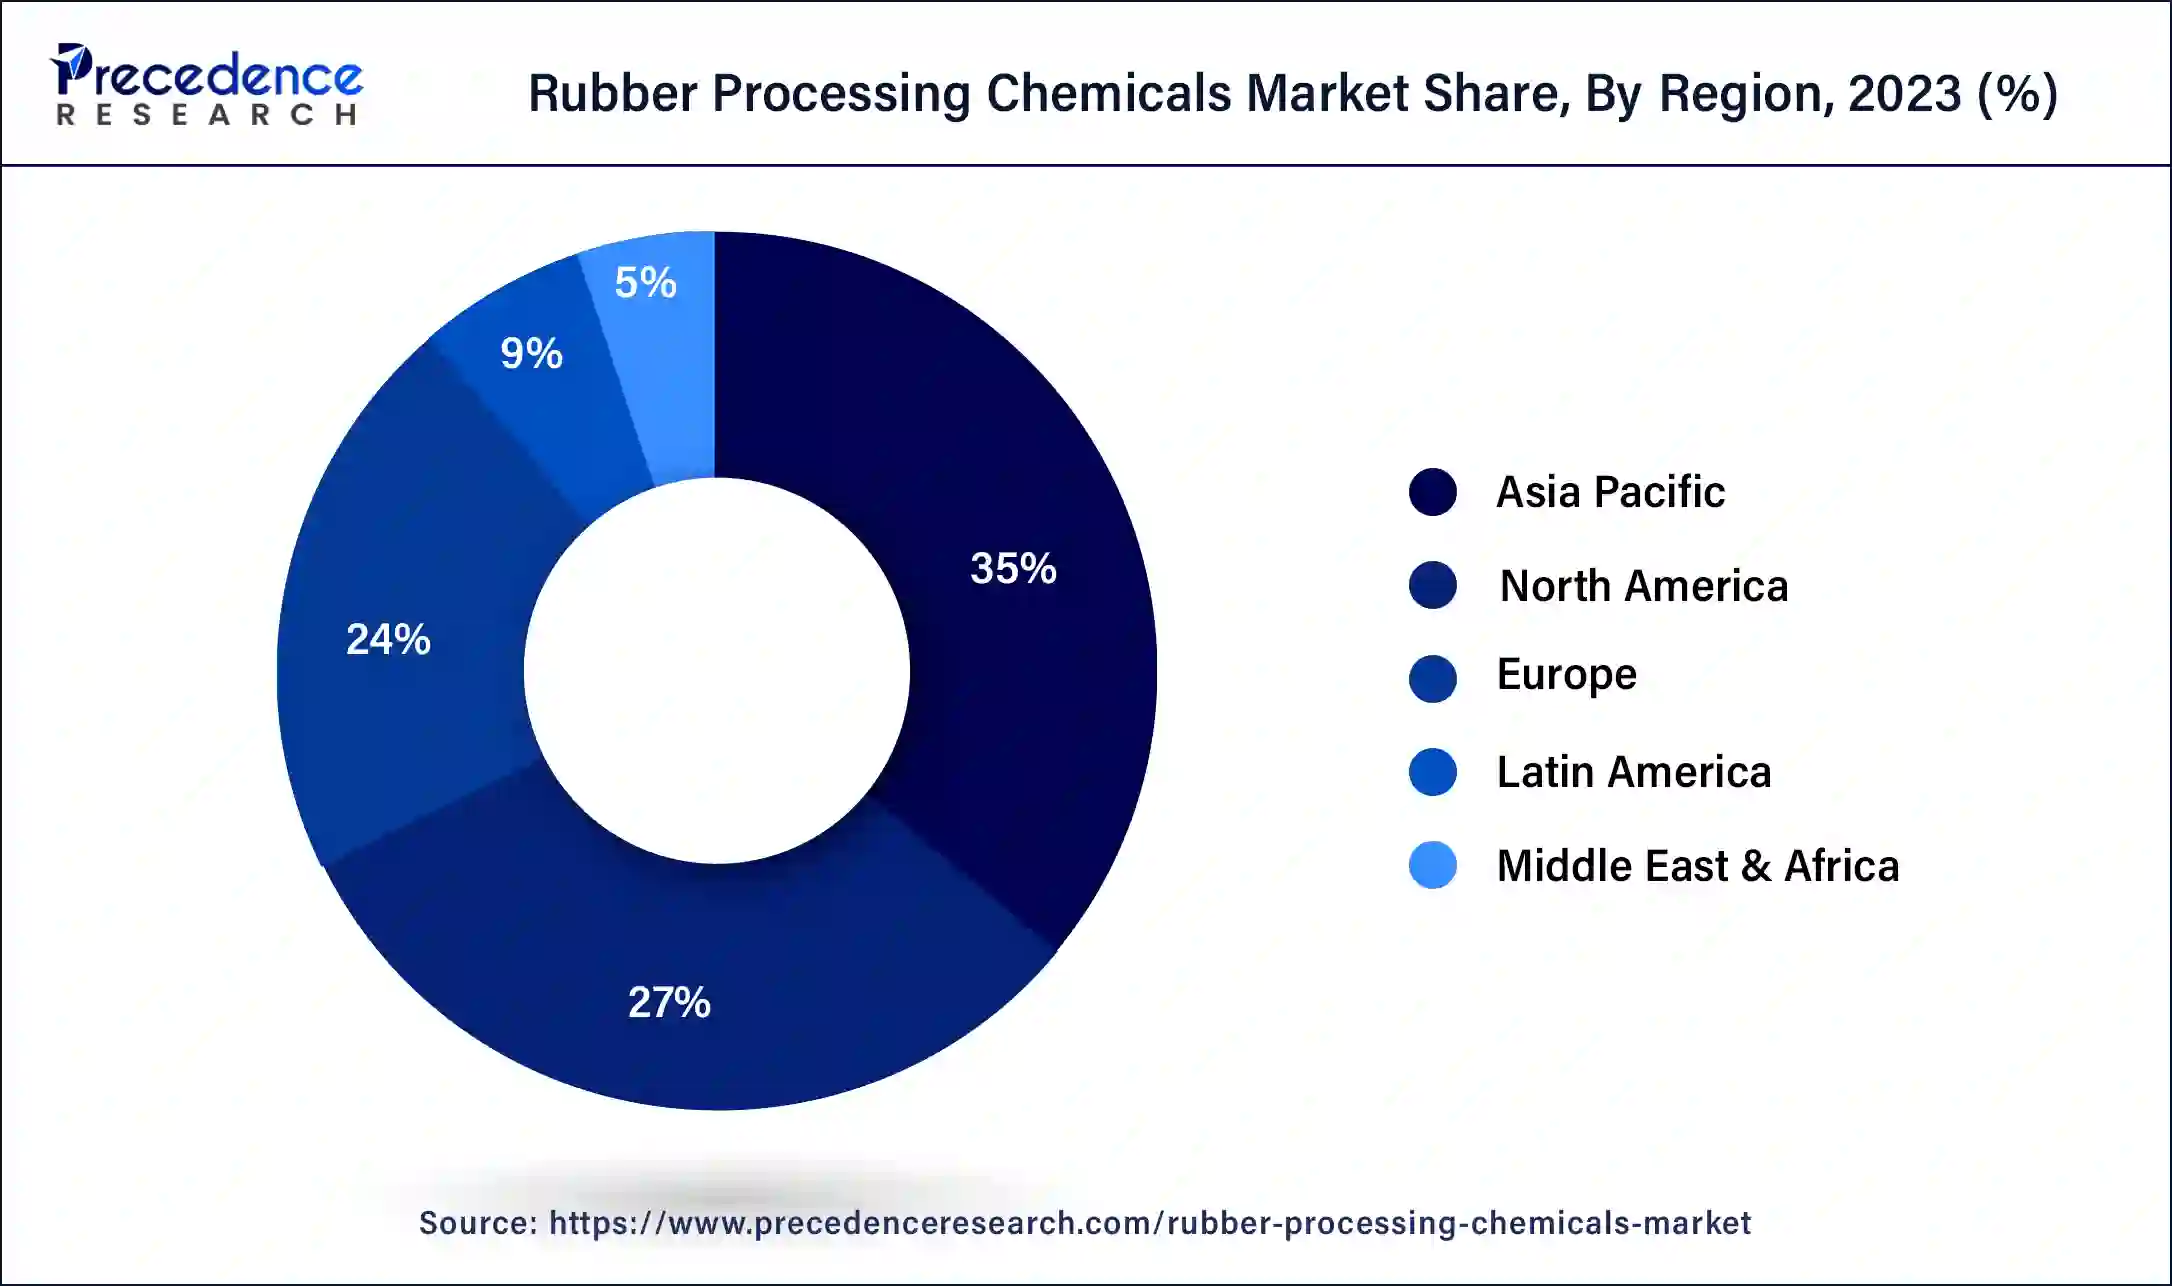 Rubber Processing Chemicals Market Share, By Region, 2023 (%)